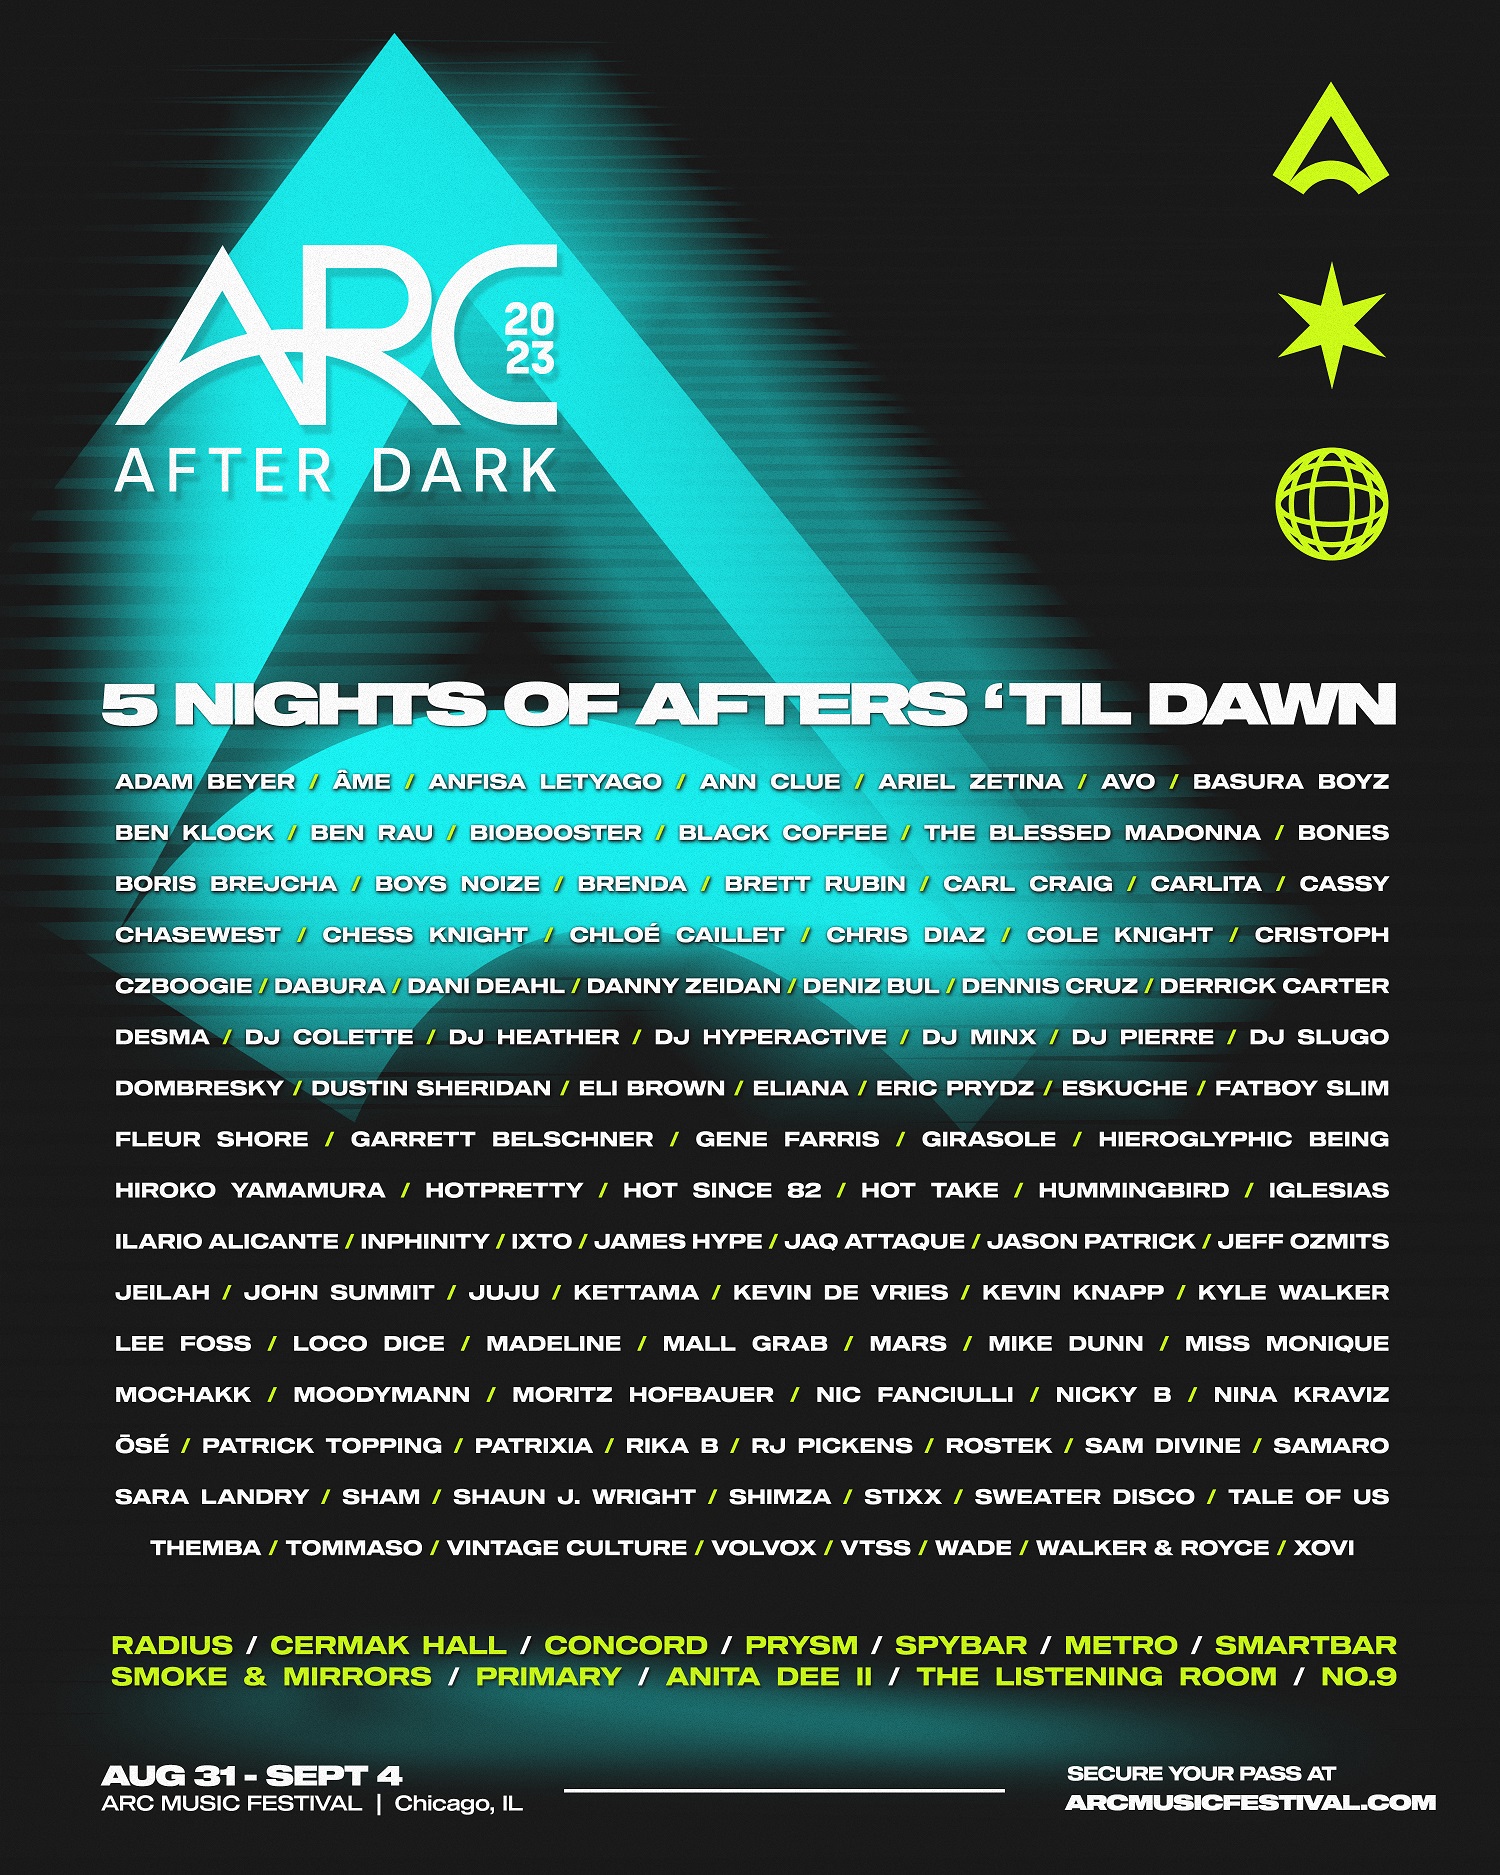 ARC Music Festival Announces After Dark Afterparty Lineups